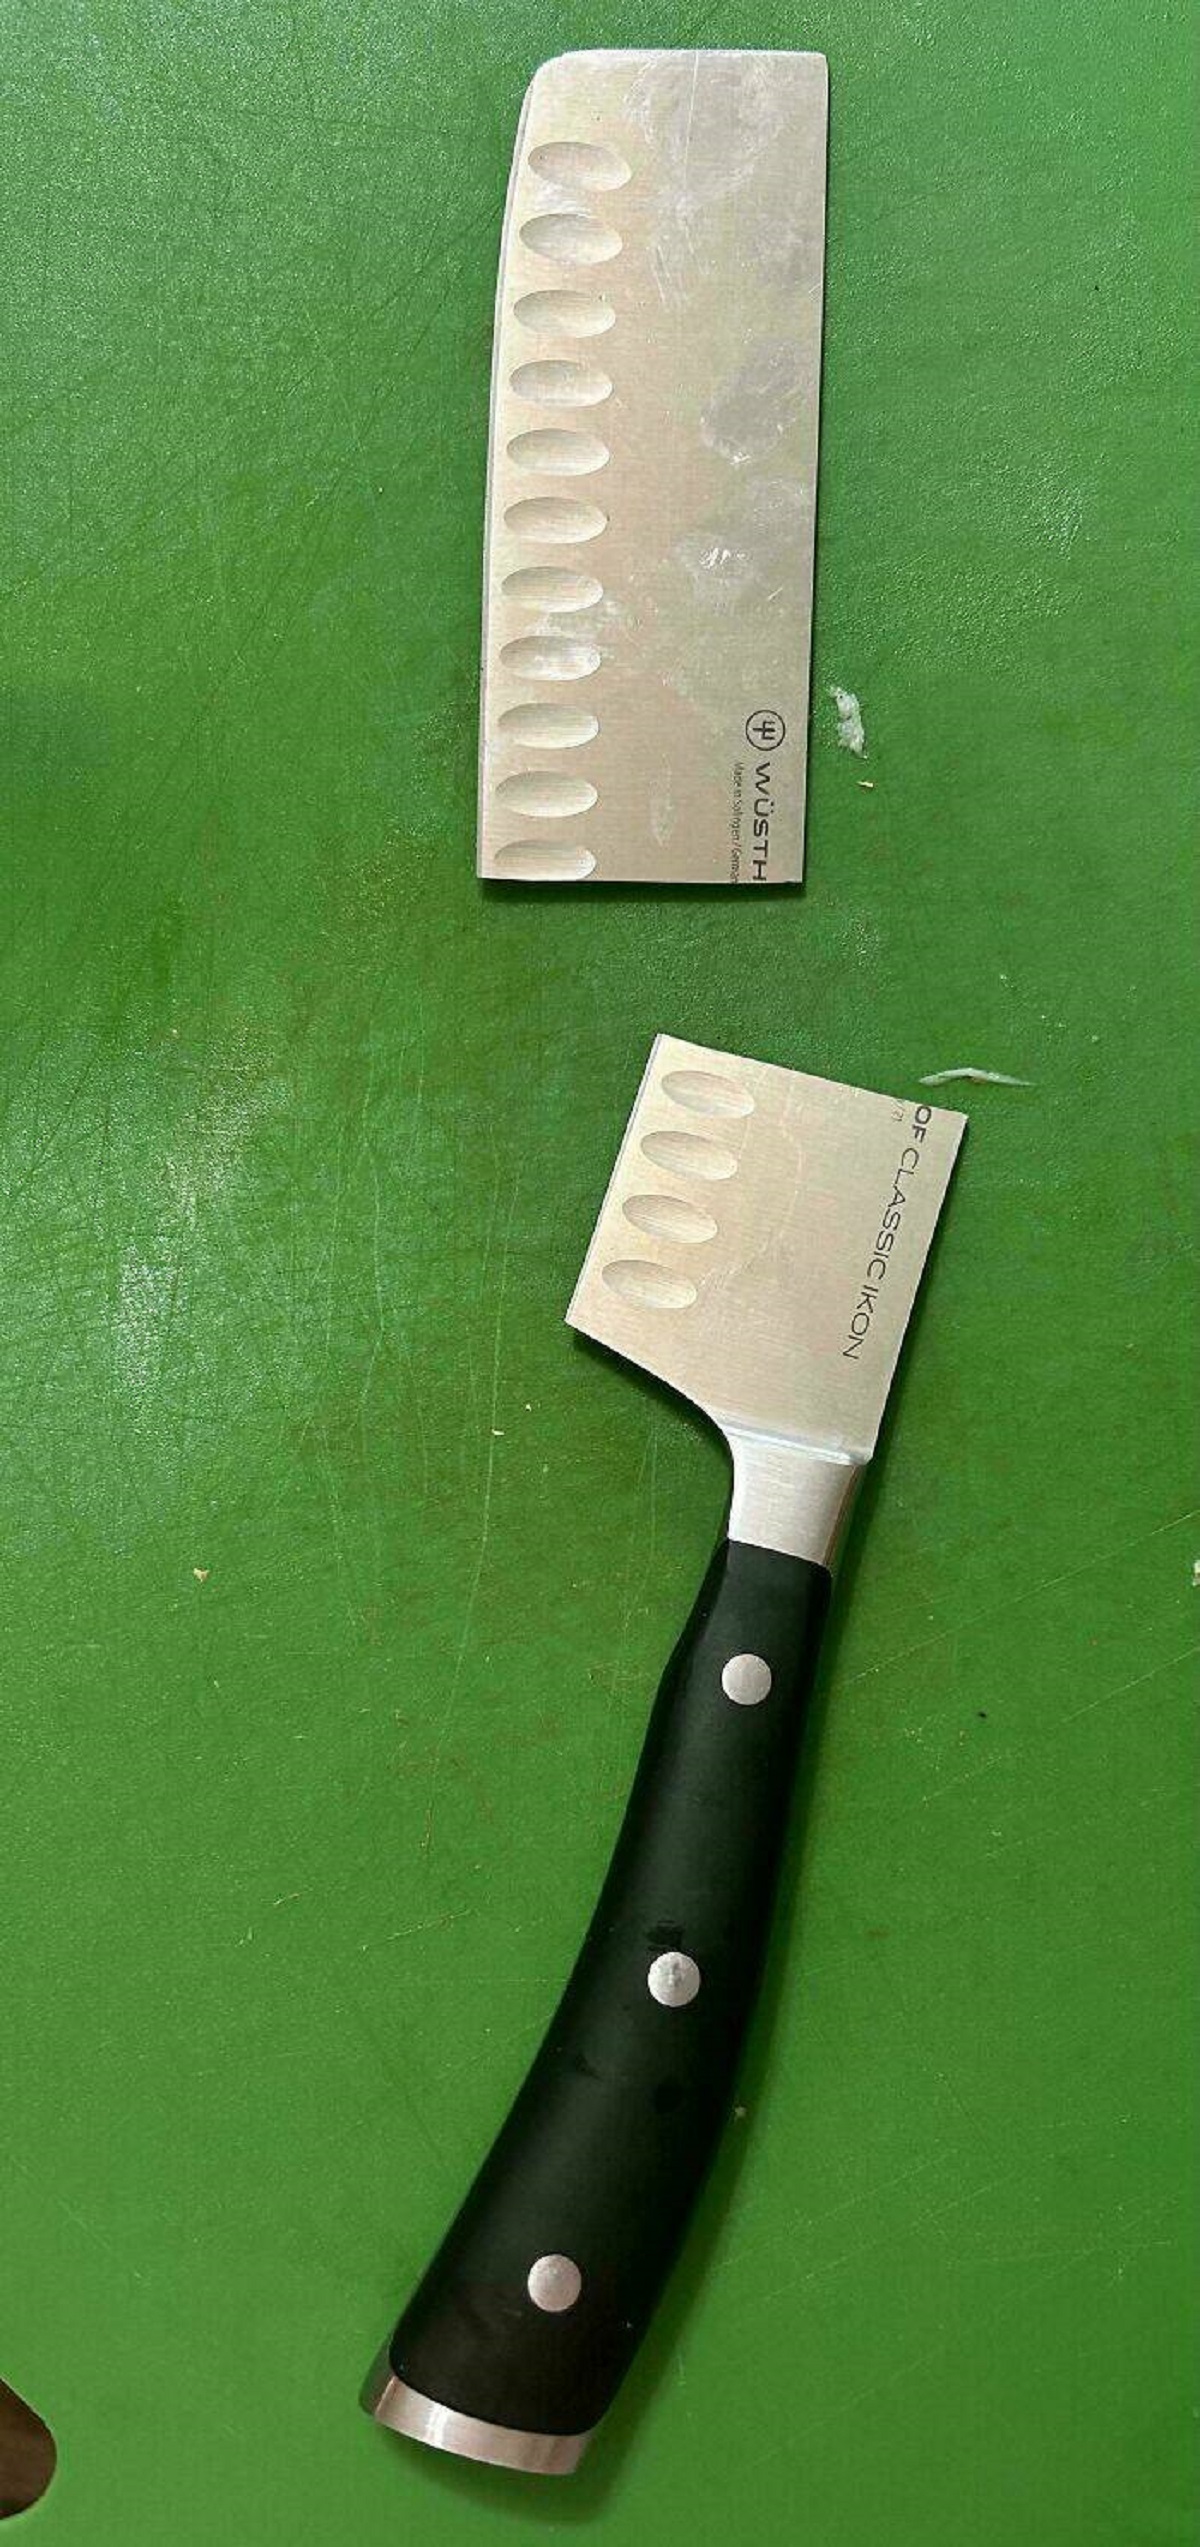 "My Husband Broke Our Knife In Half Today By Accident"